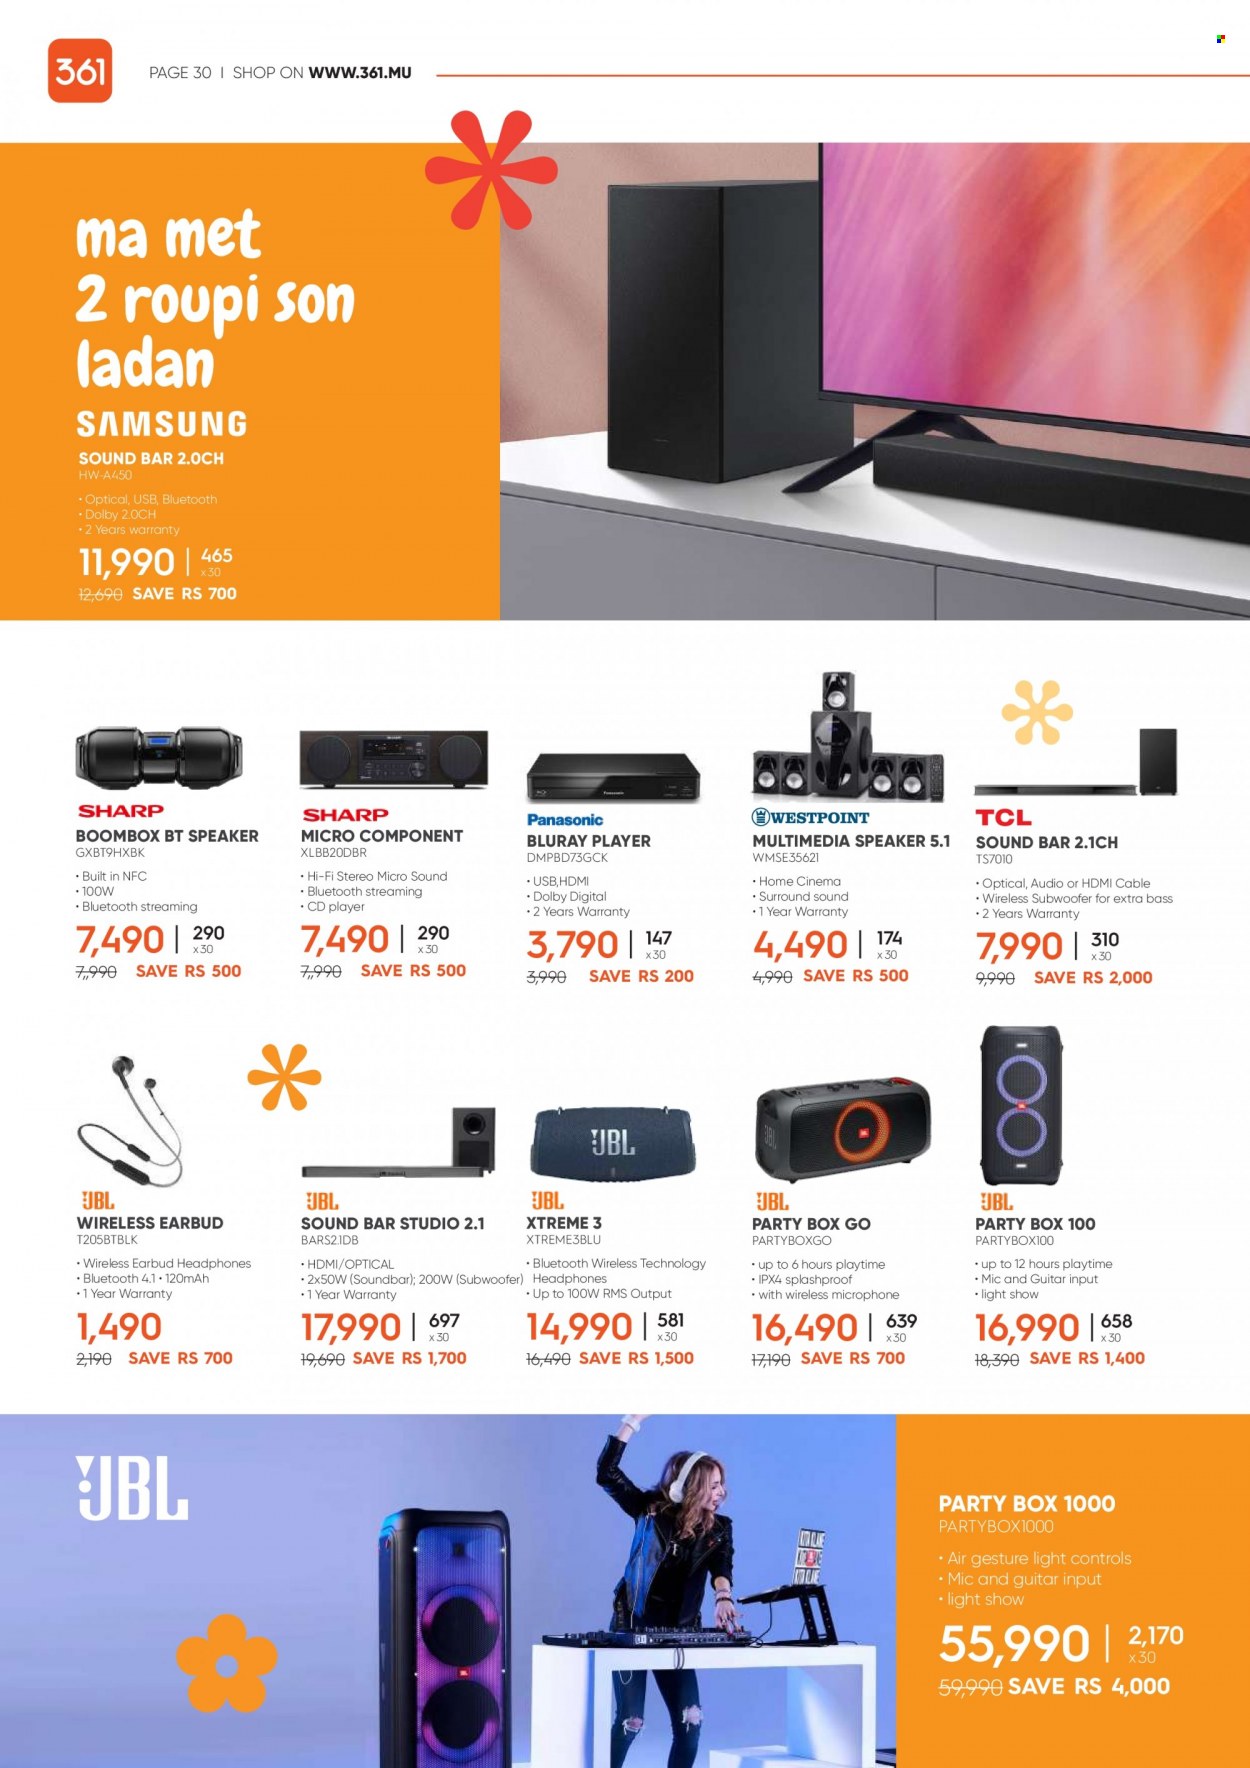 thumbnail - 361 Catalogue - 14.05.2022 - 13.06.2022 - Sales products - HDMI cable, Blu-ray, home theater, hi-fi, cd player, speaker, subwoofer, wireless subwoofer, sound bar, microphone, headphones. Page 30.